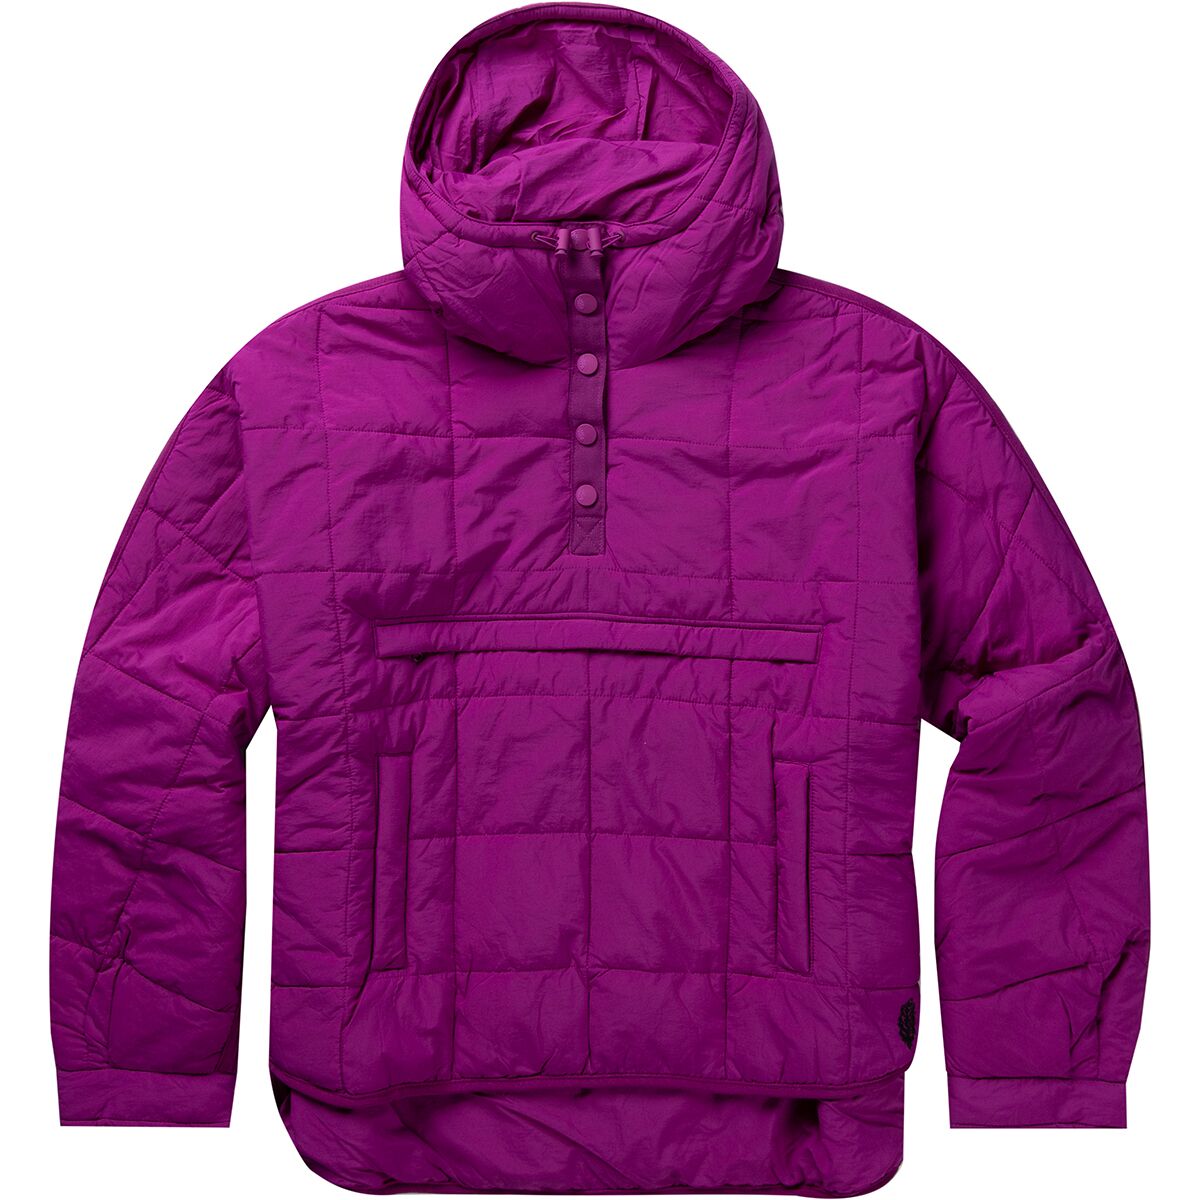 FP Movement Pippa Packable Pullover - Women's